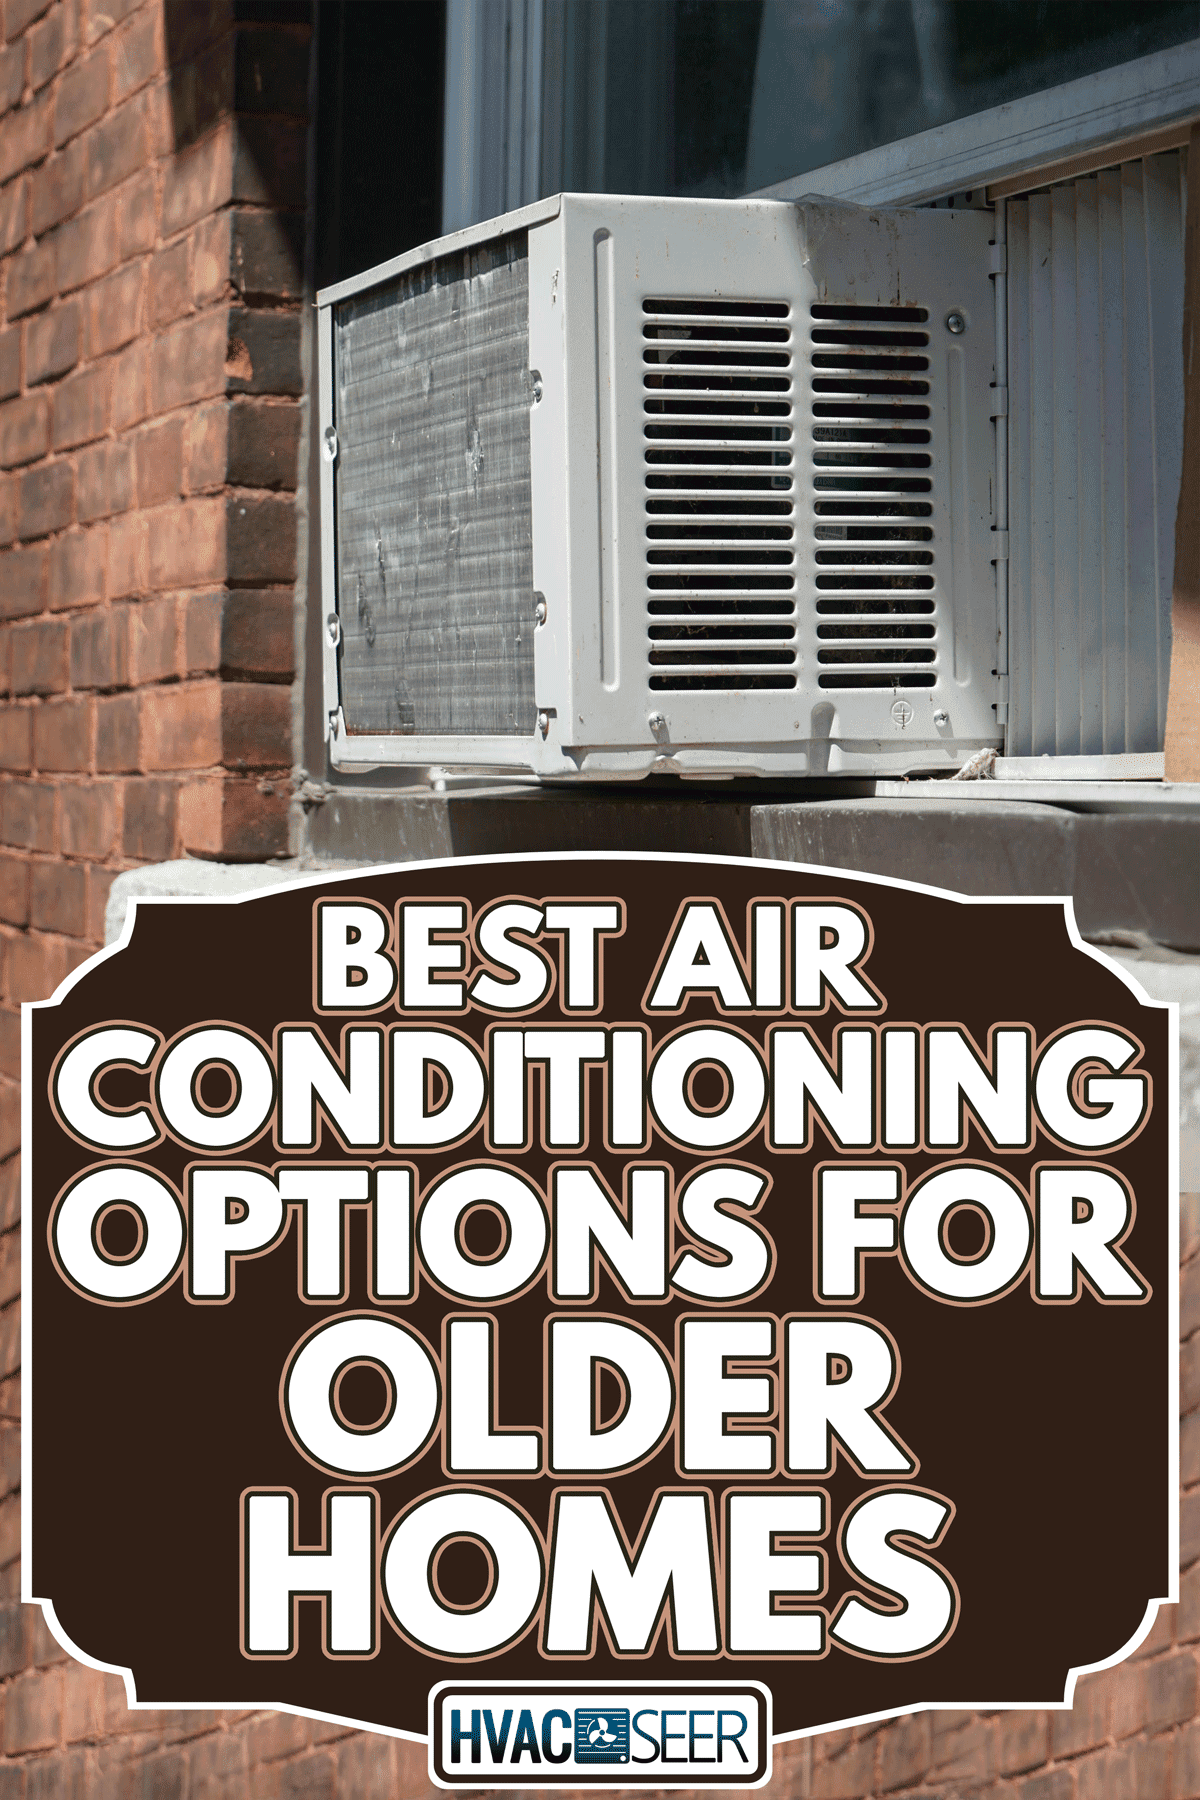 Window AC unit attached to a brick walled house, Best Air Conditioning Options For Older Homes